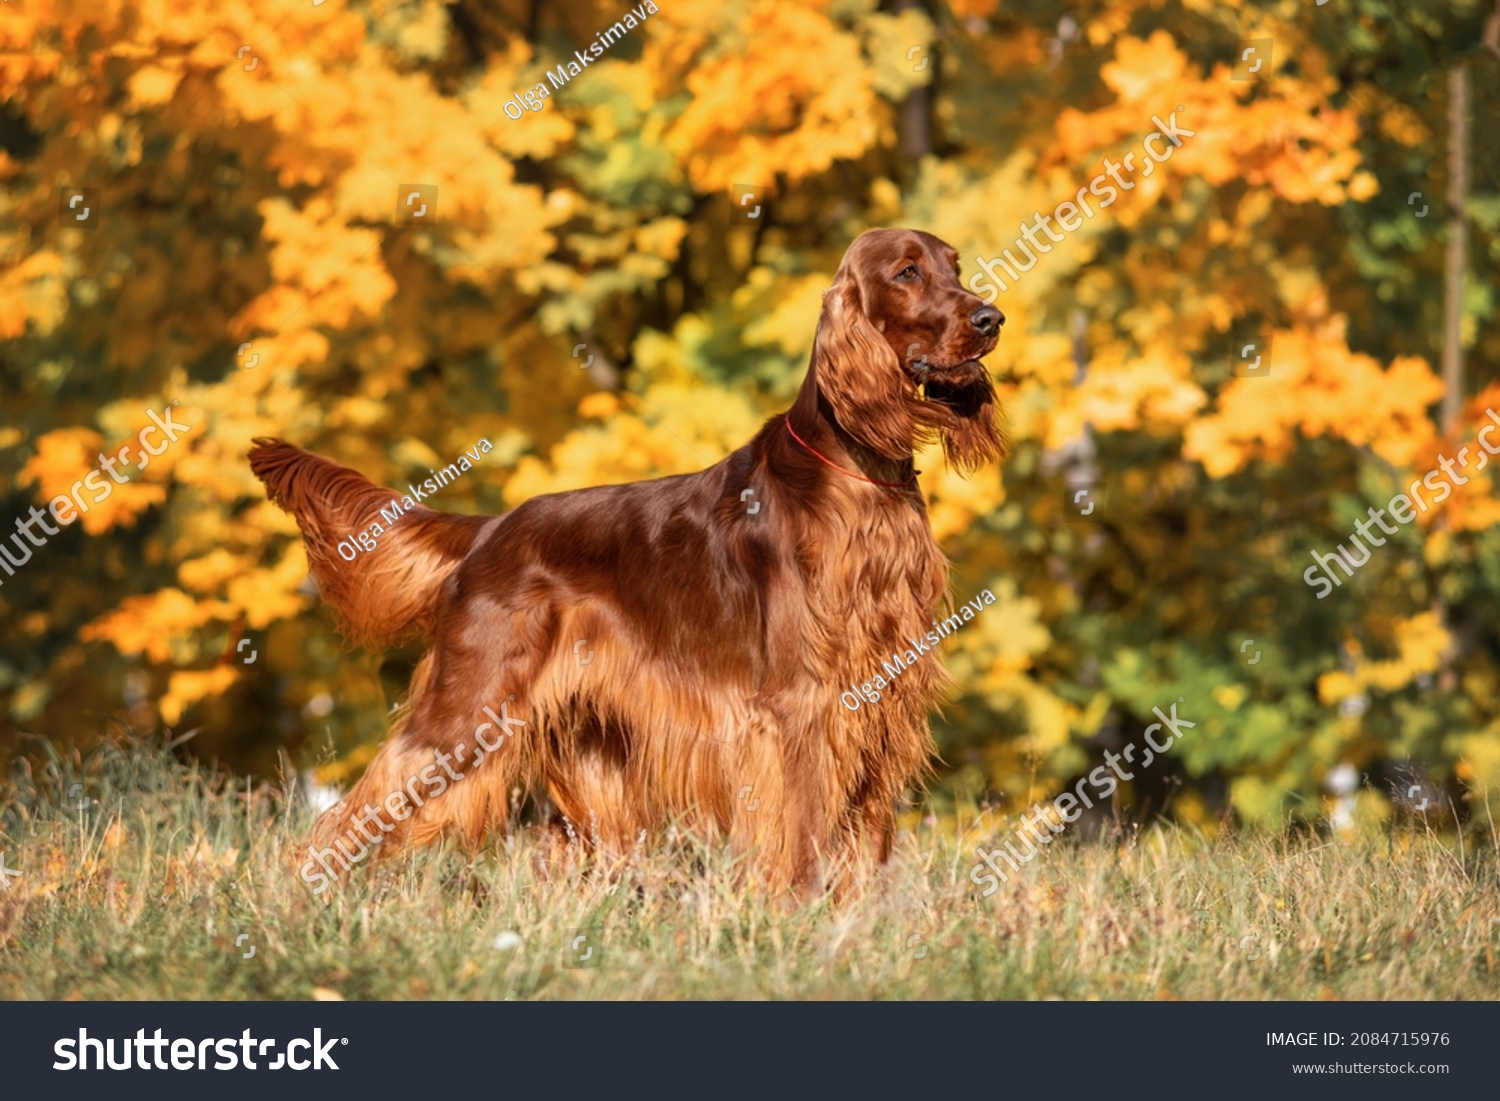 Magnificent Irish red setter on the background beautiful yellow, orange leaves Autumn on a Sunny day. Exhibition stand dogs. #2084715976